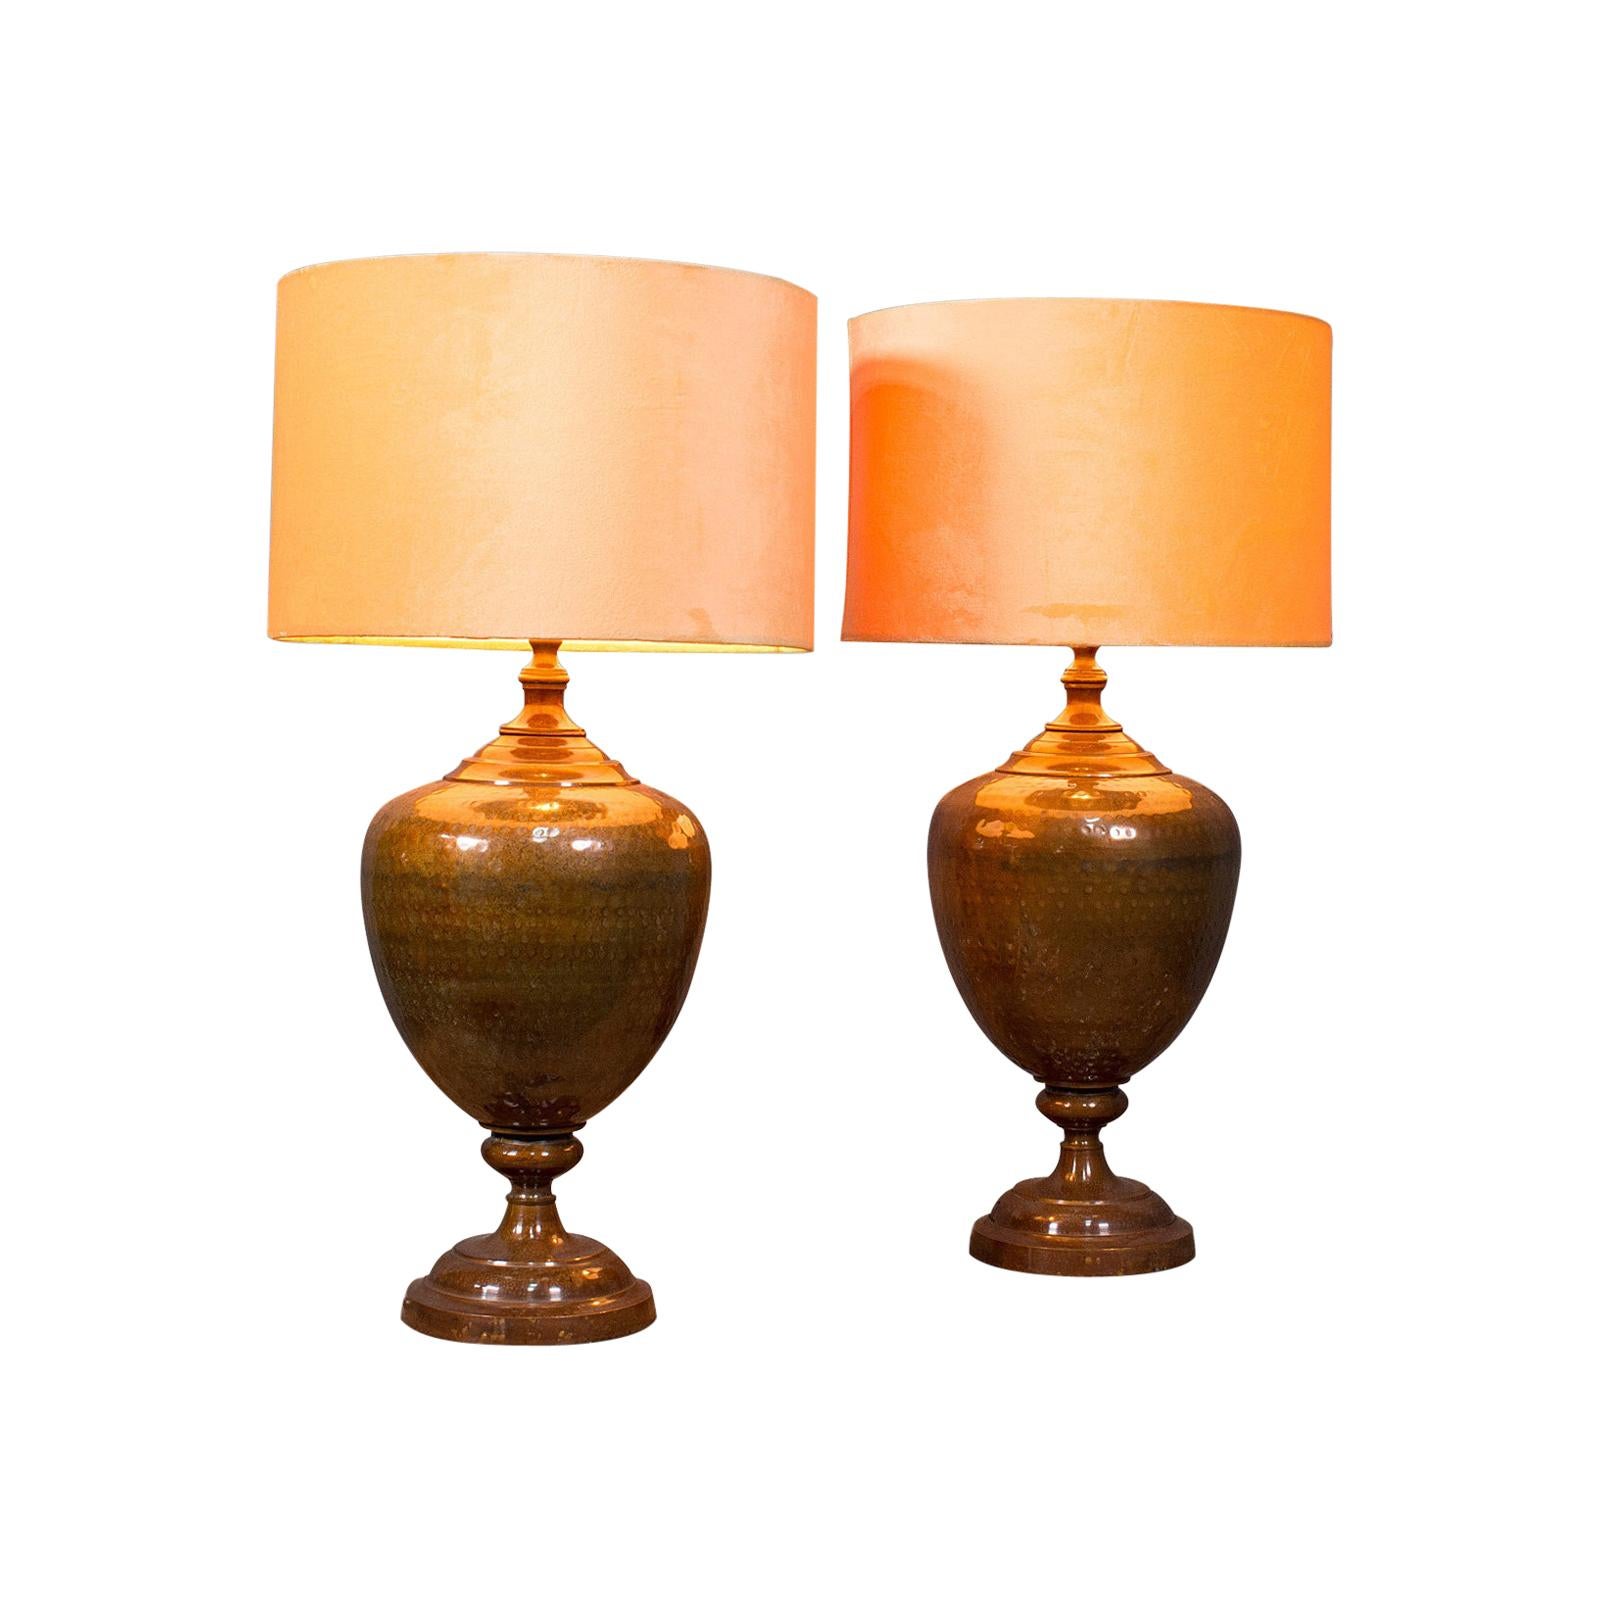 Pair of Vintage Table Lamps, English, Brass, Decorative, Side Light, Circa 1940